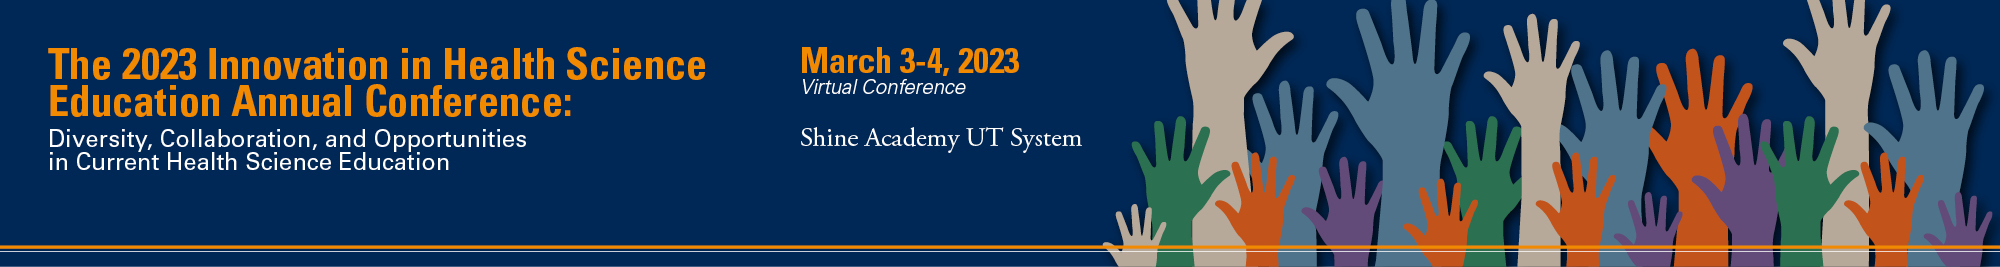 The 2023 Innovation in Health Science Education Annual Conference: Diversity, Collaboration, and Opportunities in Current Health Science Education Banner